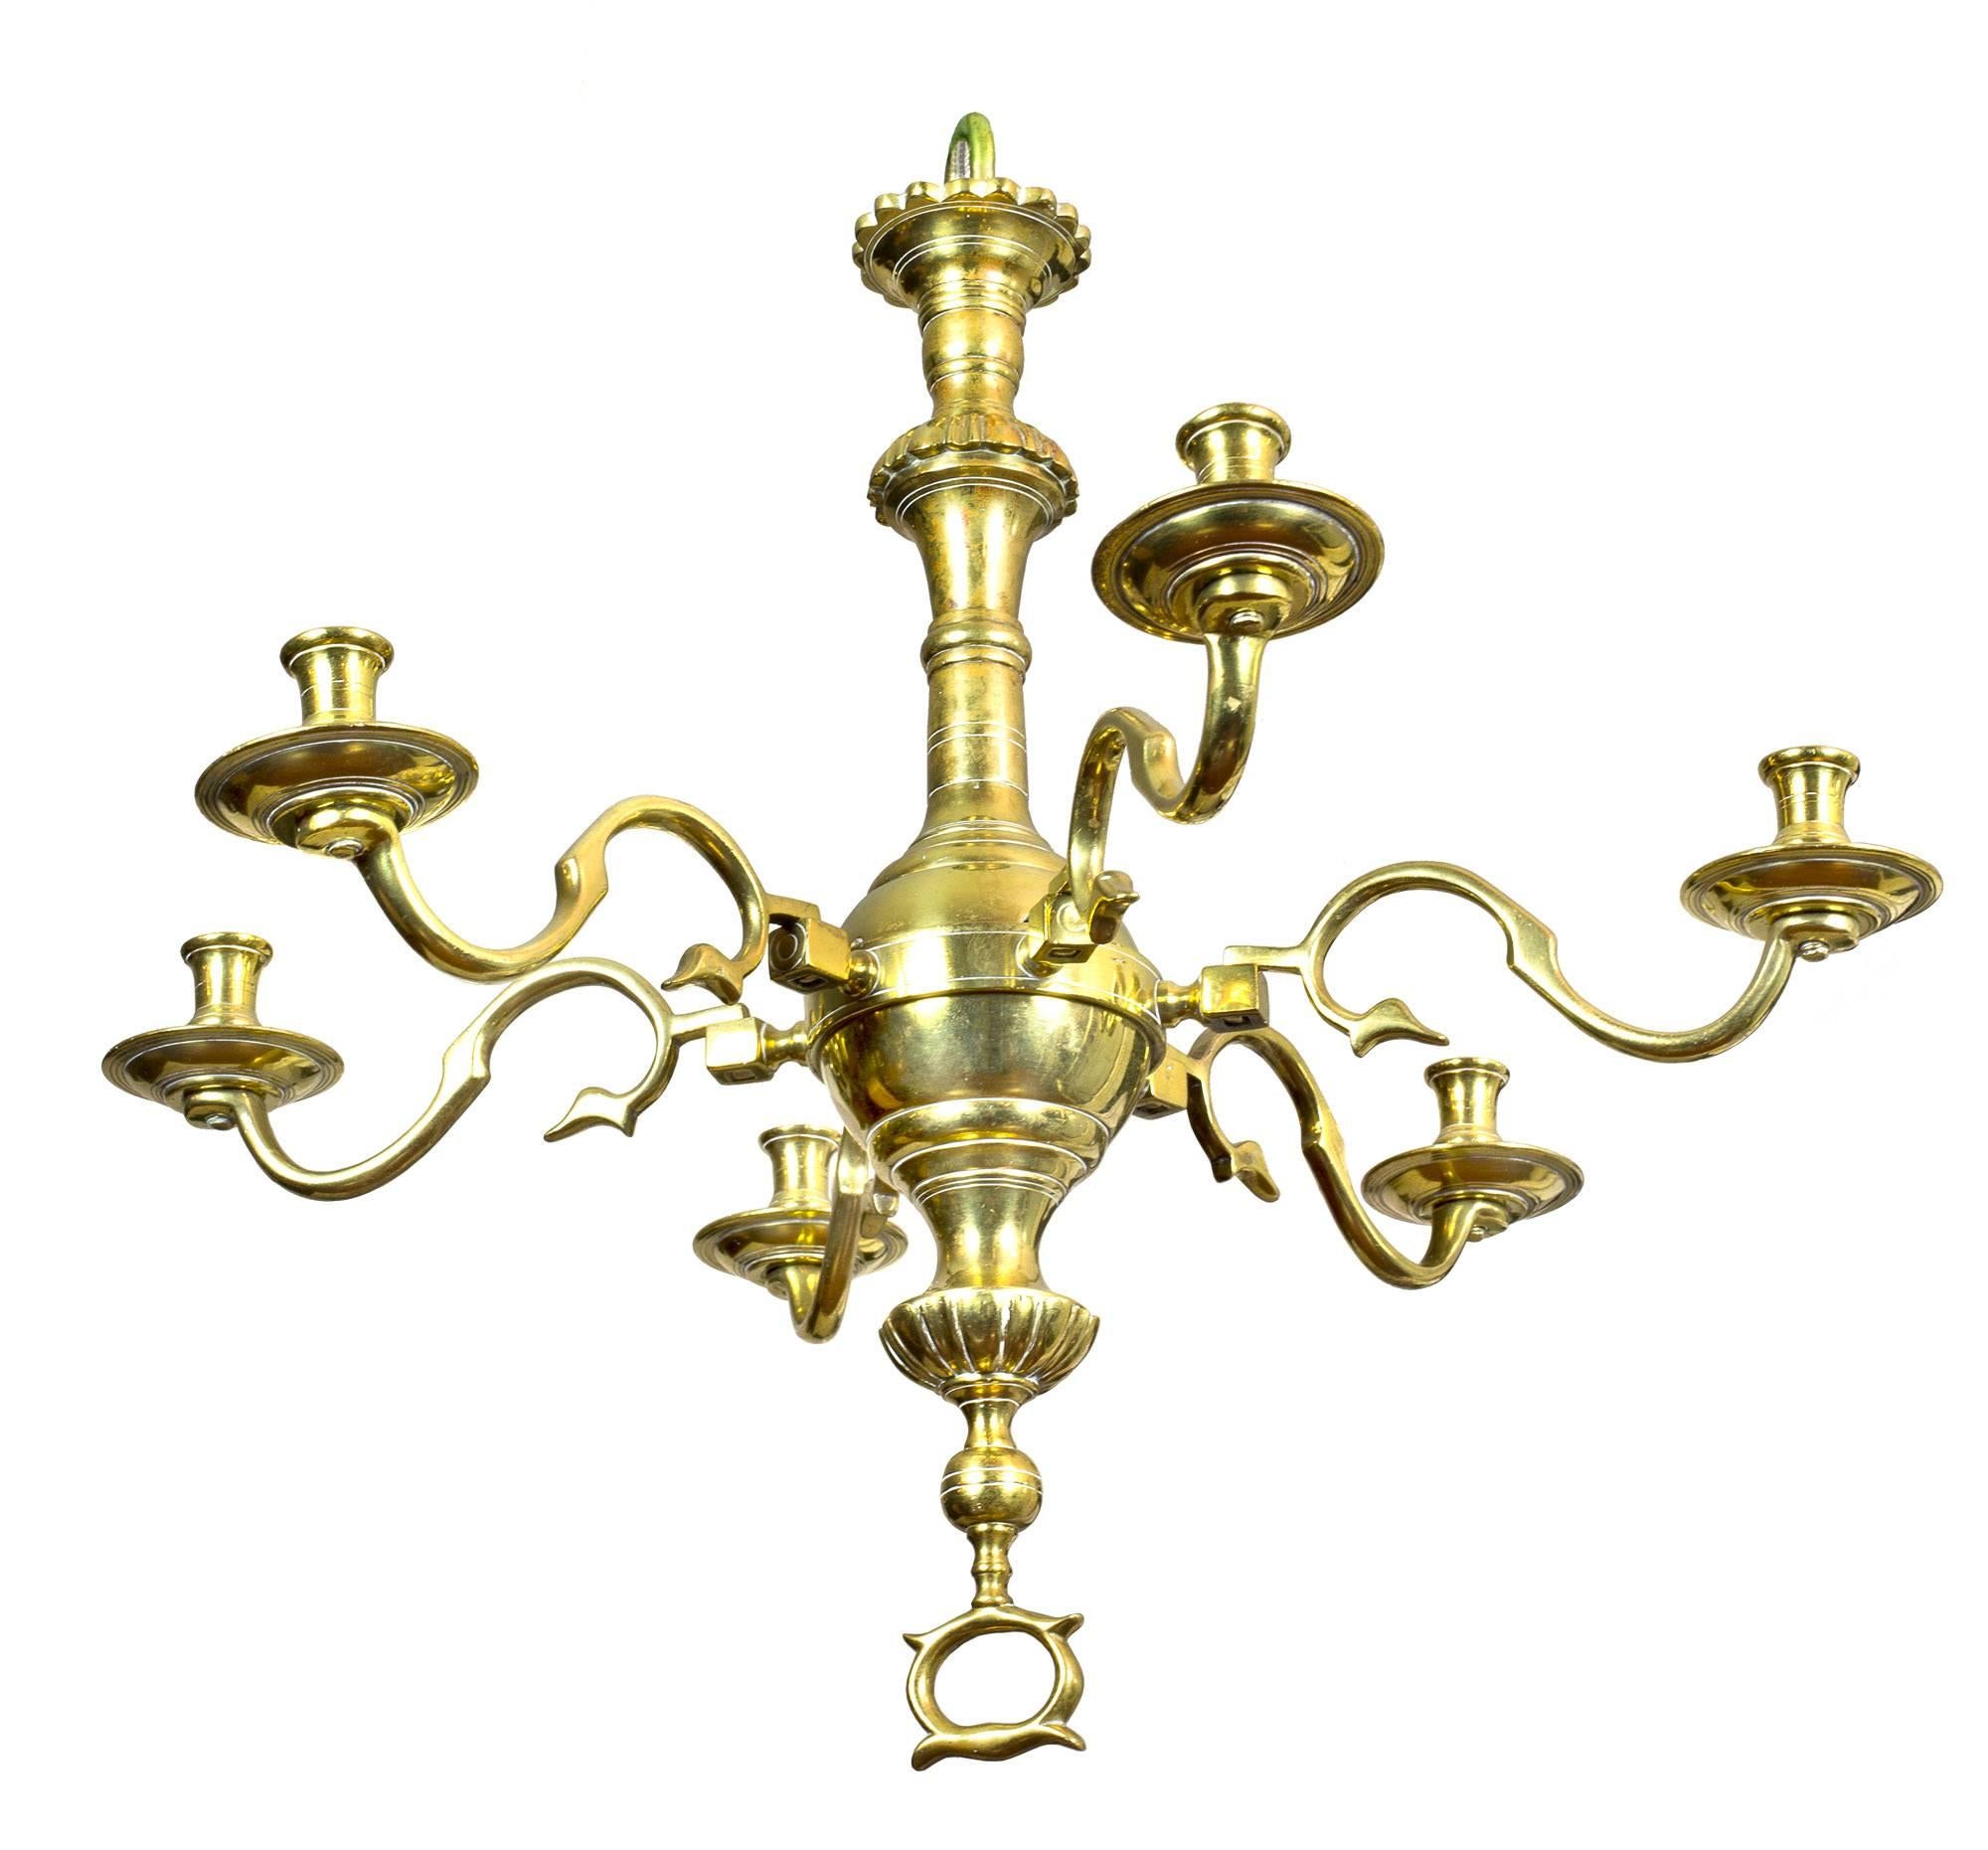 British Colonial Fine Classic Six-Light English Brass Chandelier with Trammel, Both, circa 1750 For Sale